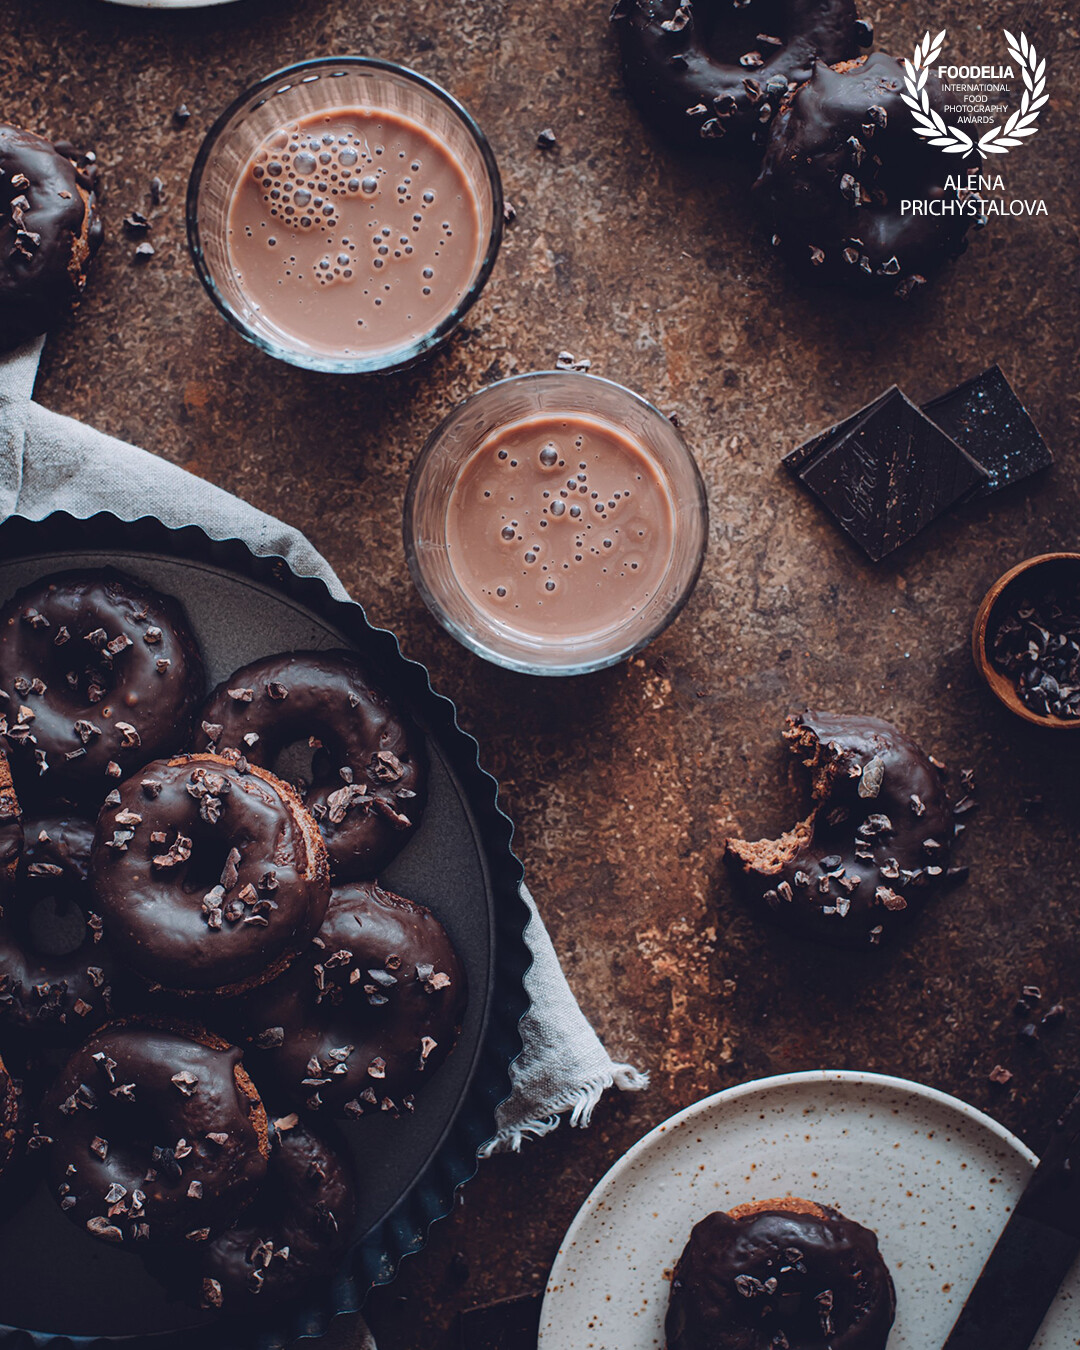 I love brown colour and monochromatic styling. Different shades of brown gives to the photo of donuts warm and inviting atmosphere.